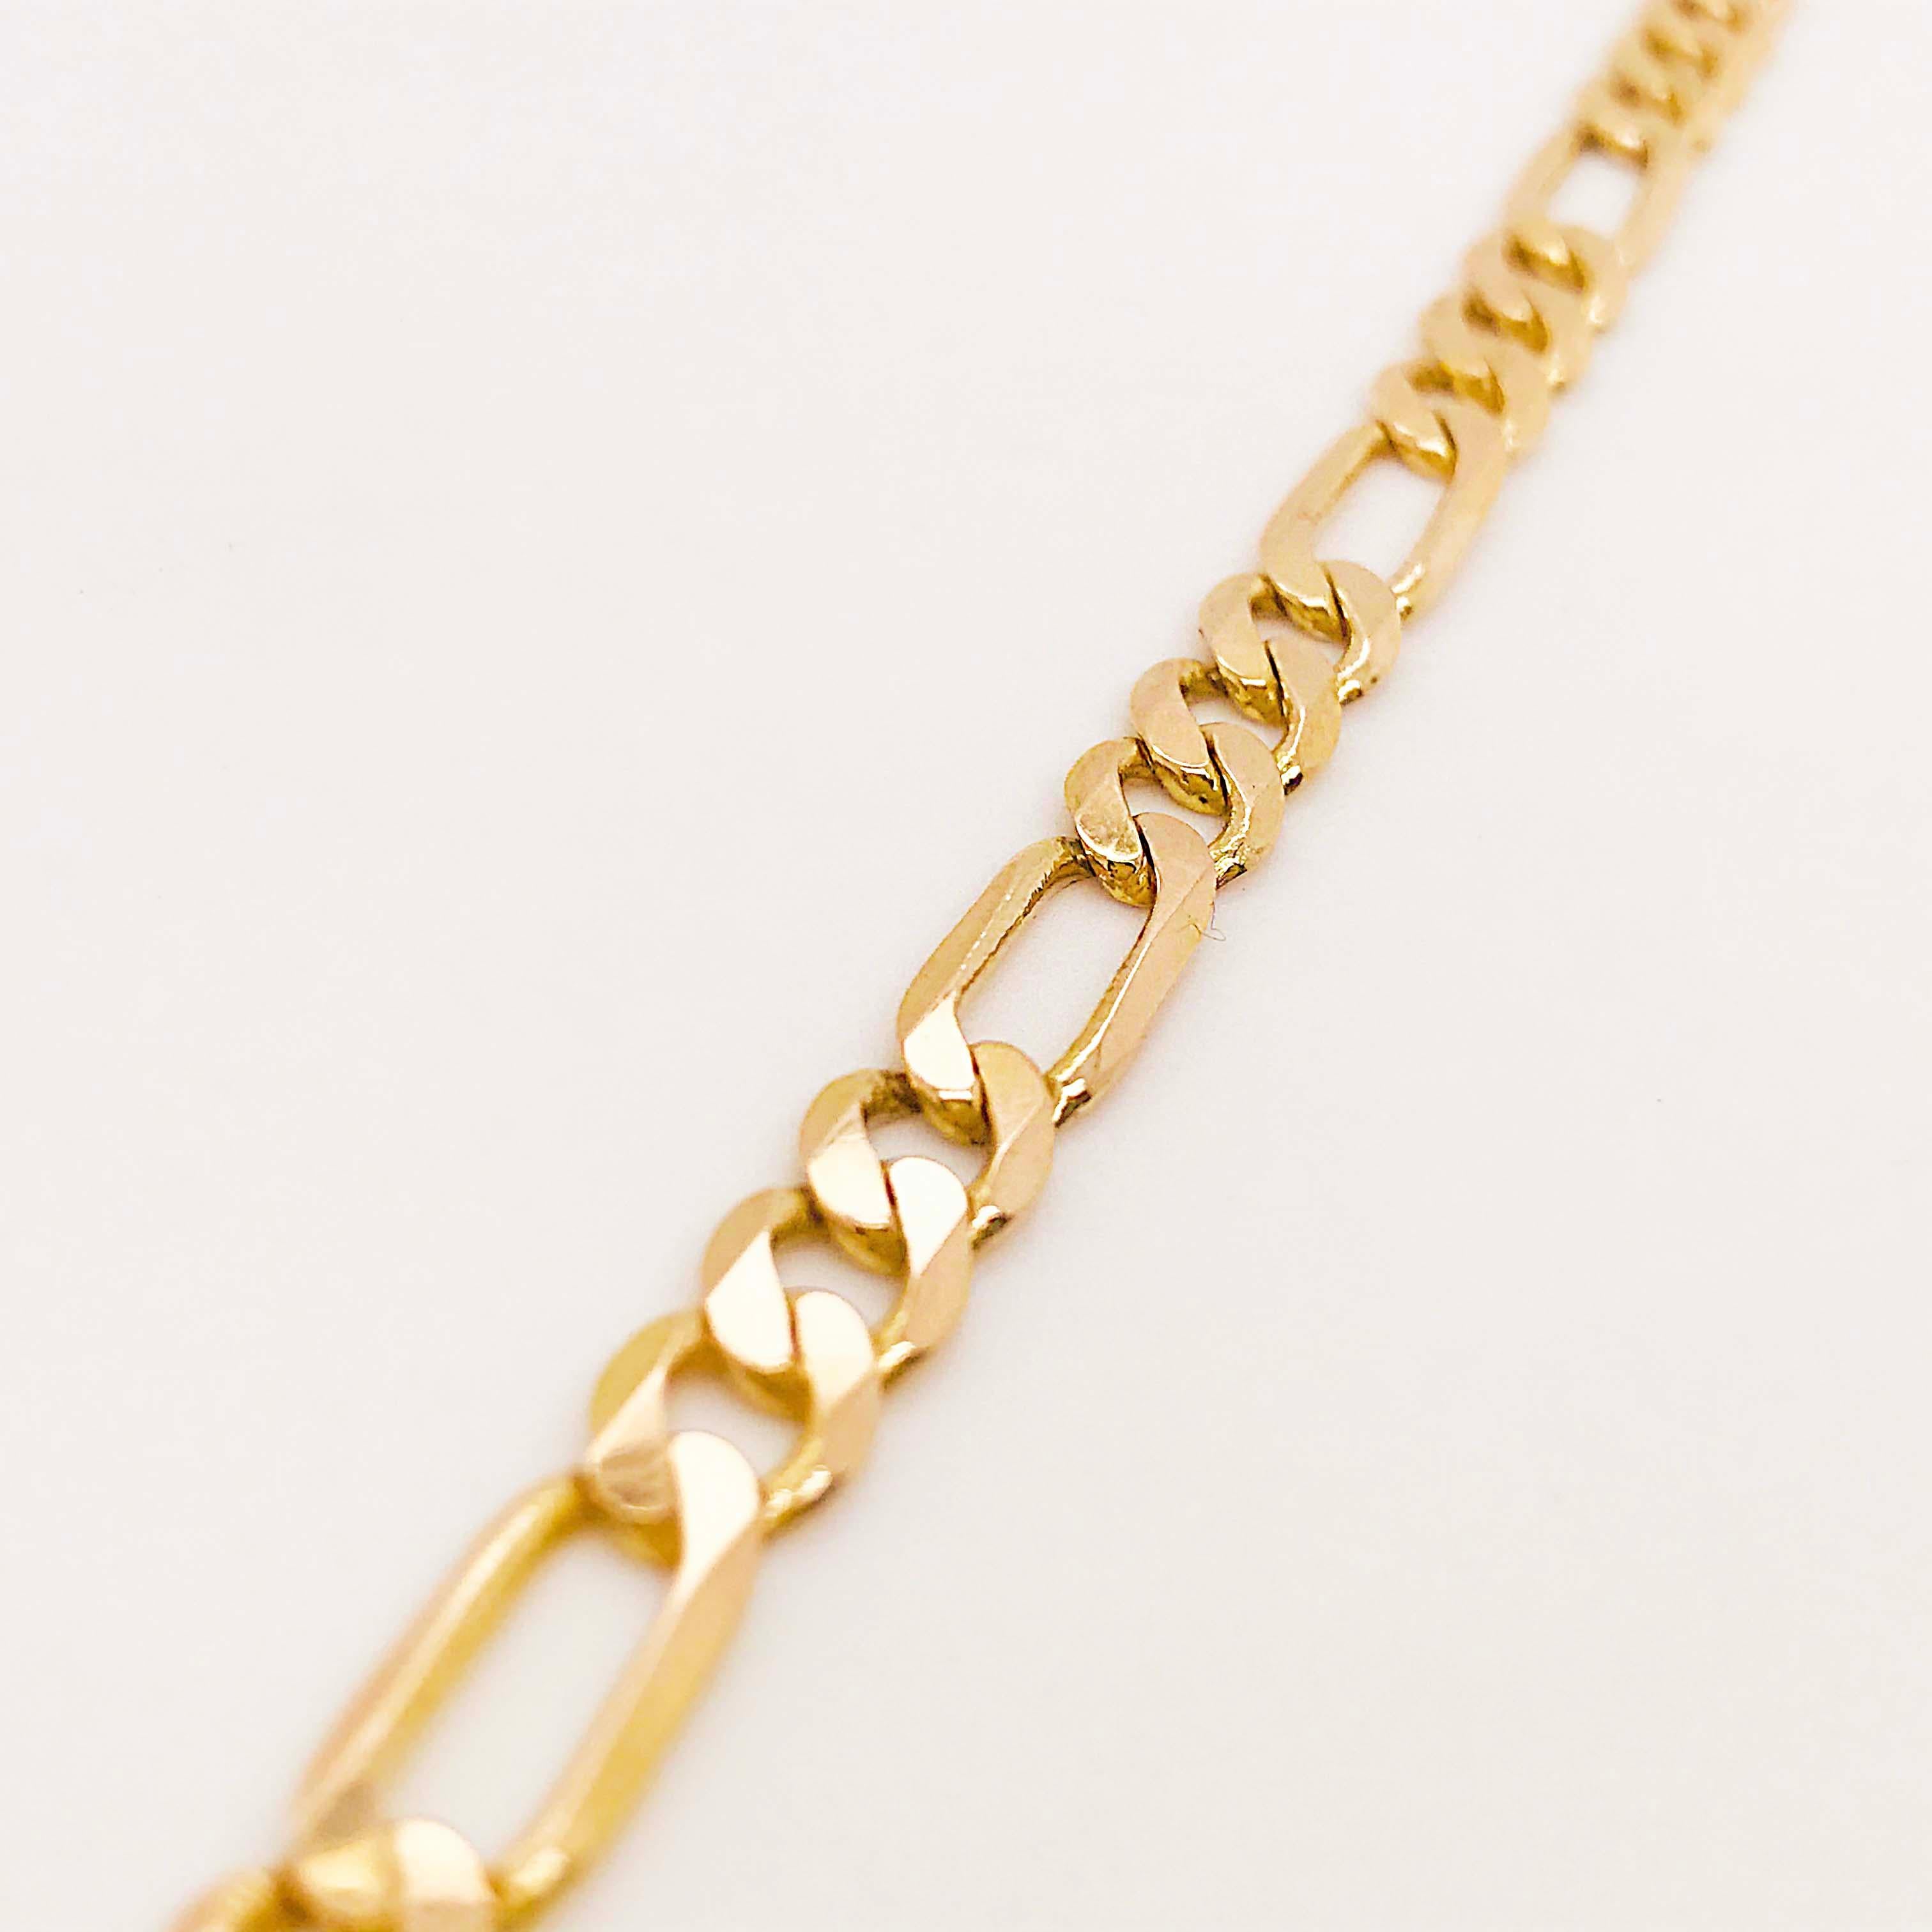 Heavy Figaro Chain Link Bracelet and Large Clasp, 14 Karat Gold 8 Inches Long 3